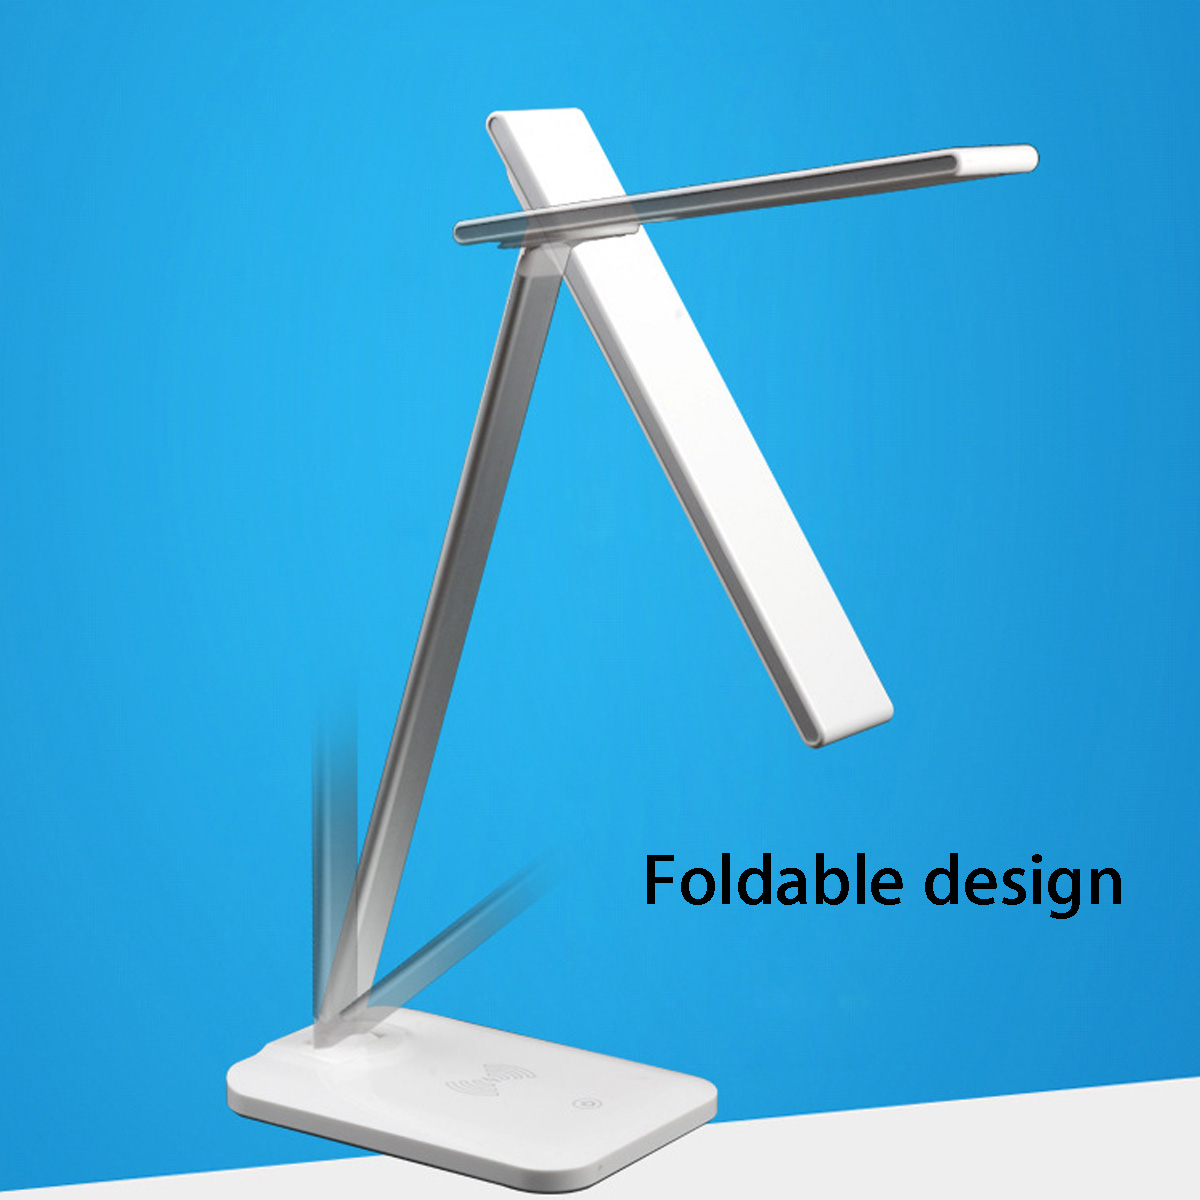 2-In-1-Qi-Wireless-Charger-Fast-Charging-PadDesk-Foldable-LED-Lamp-For-iPhone-Samsung-Huawei-Xiaomi--1457465